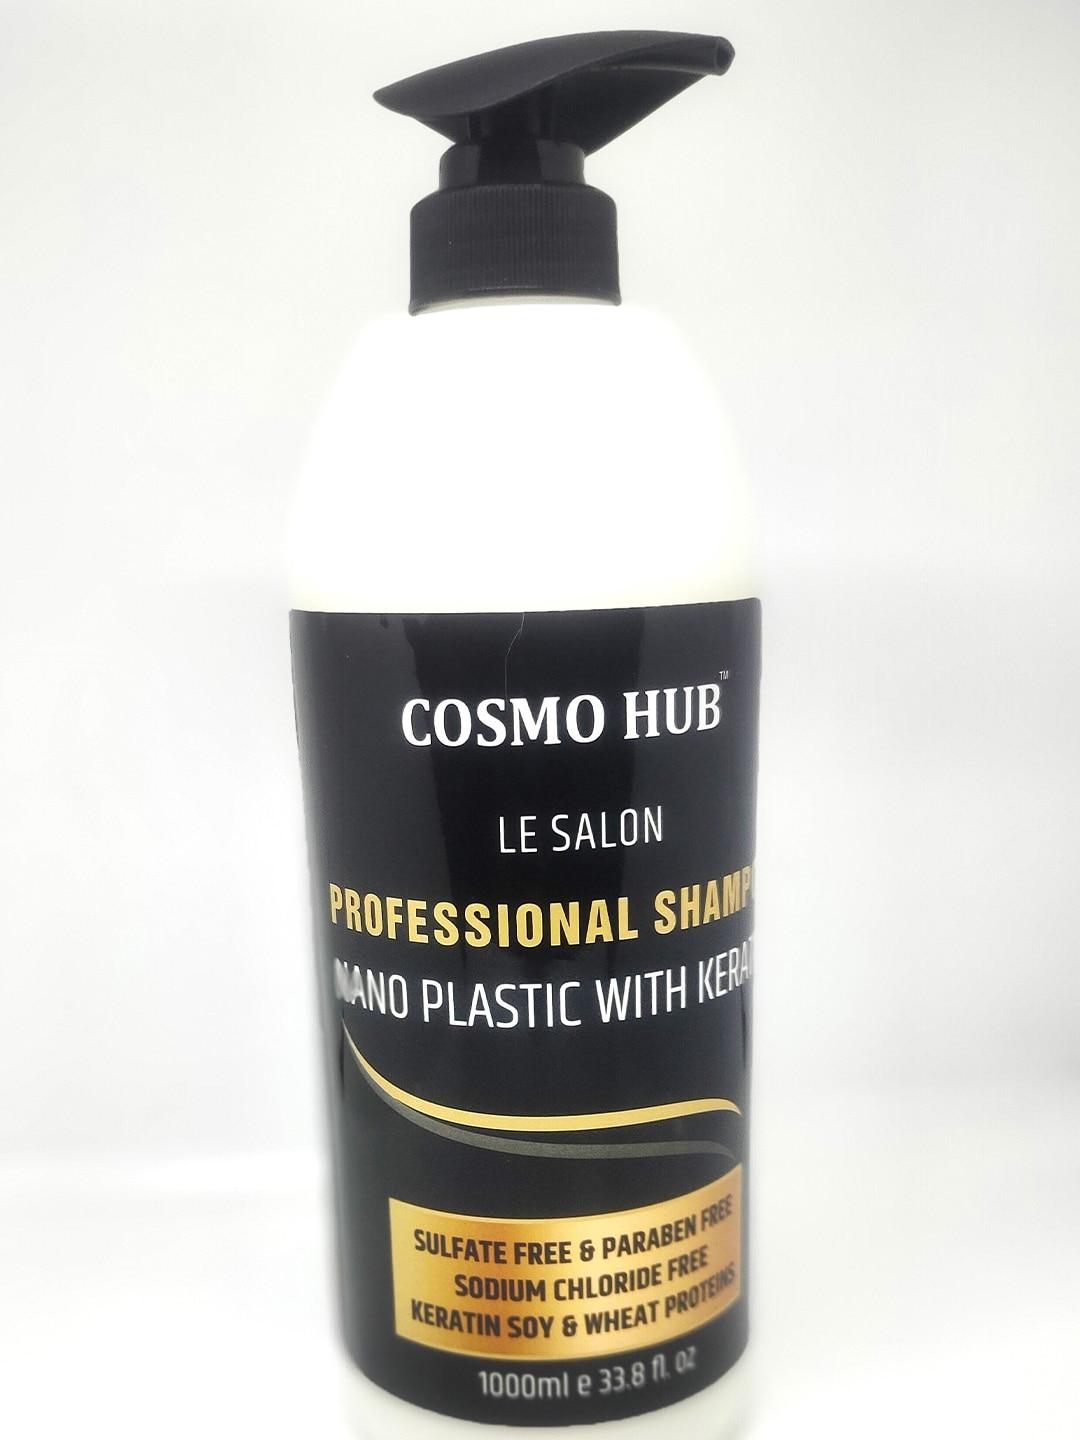 cosmo hub professional shampoo with keratin soy & wheat protein - 1 l